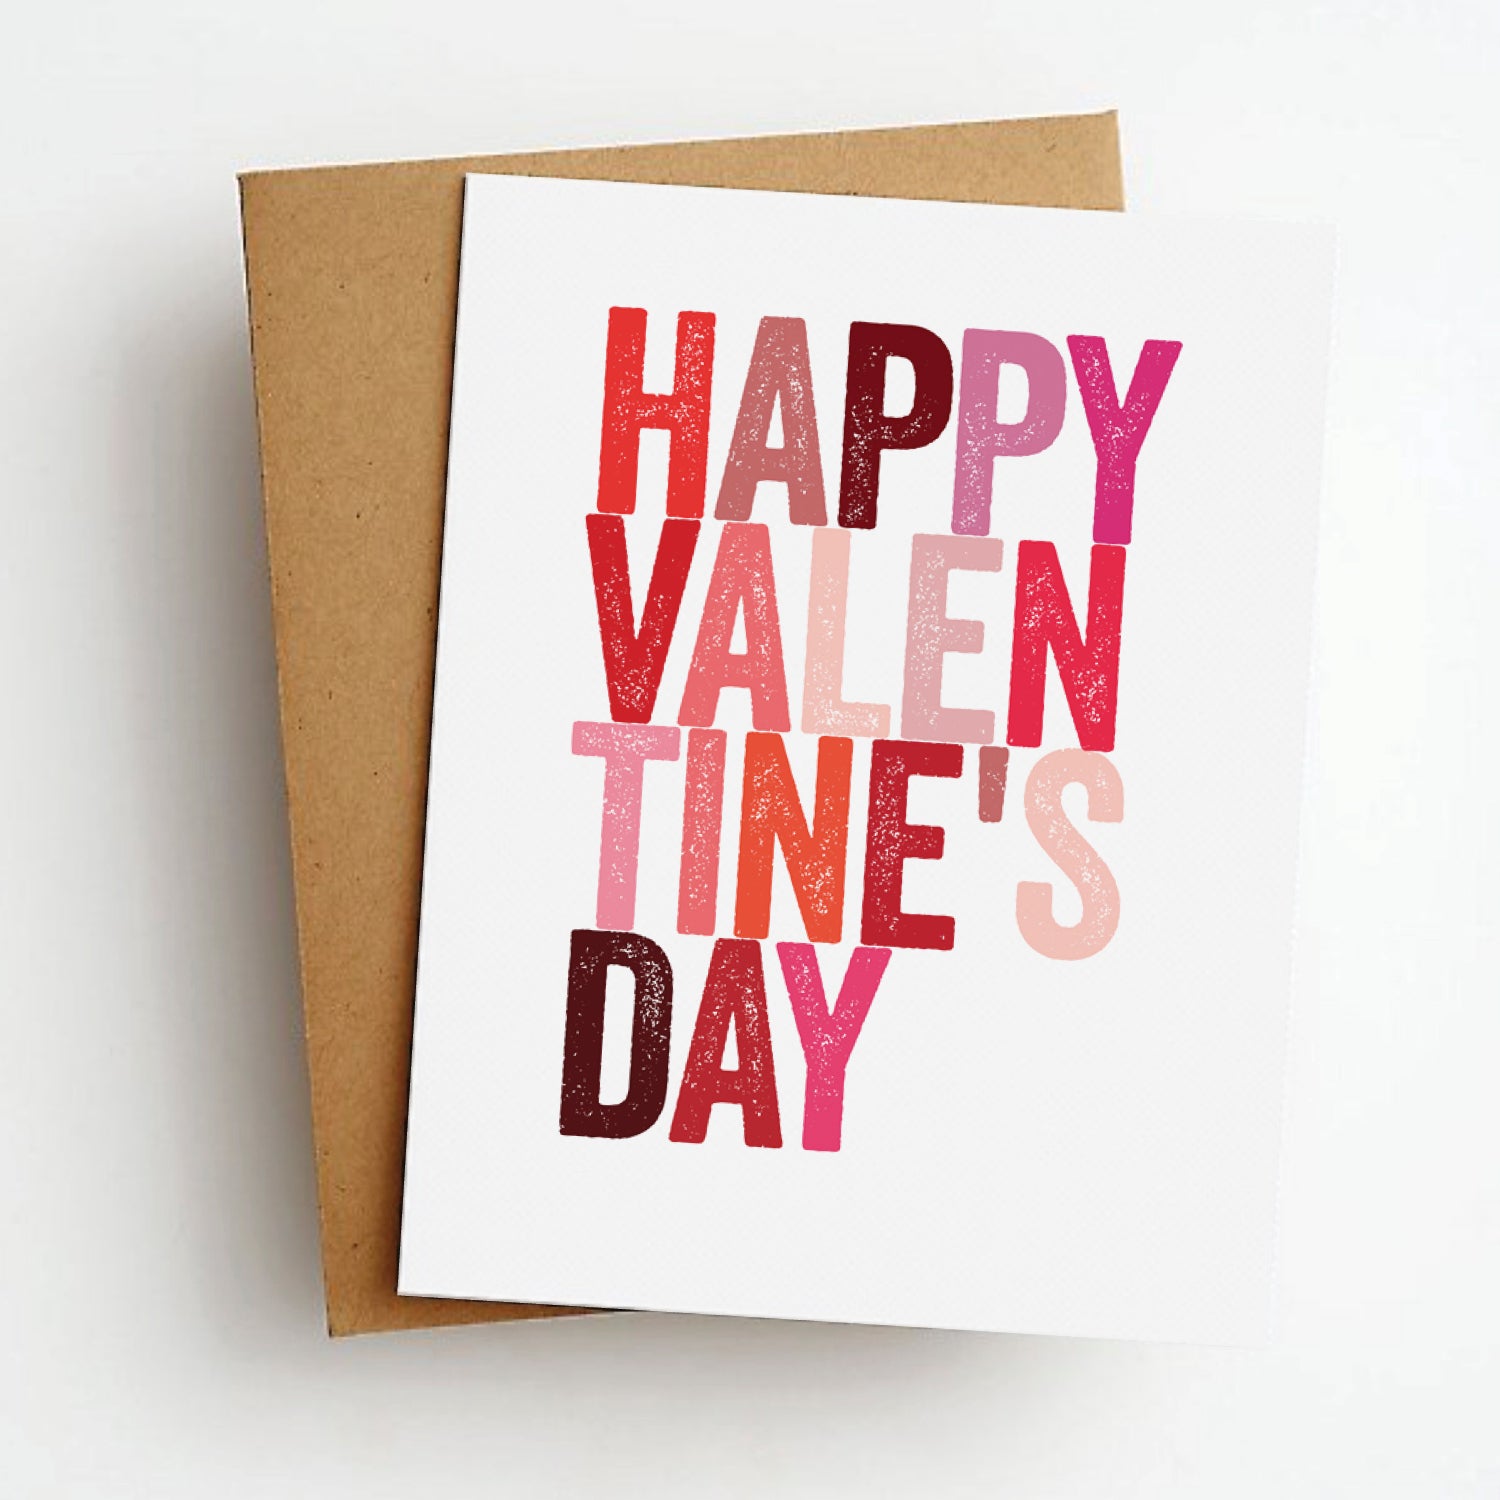 valentine's day colors card